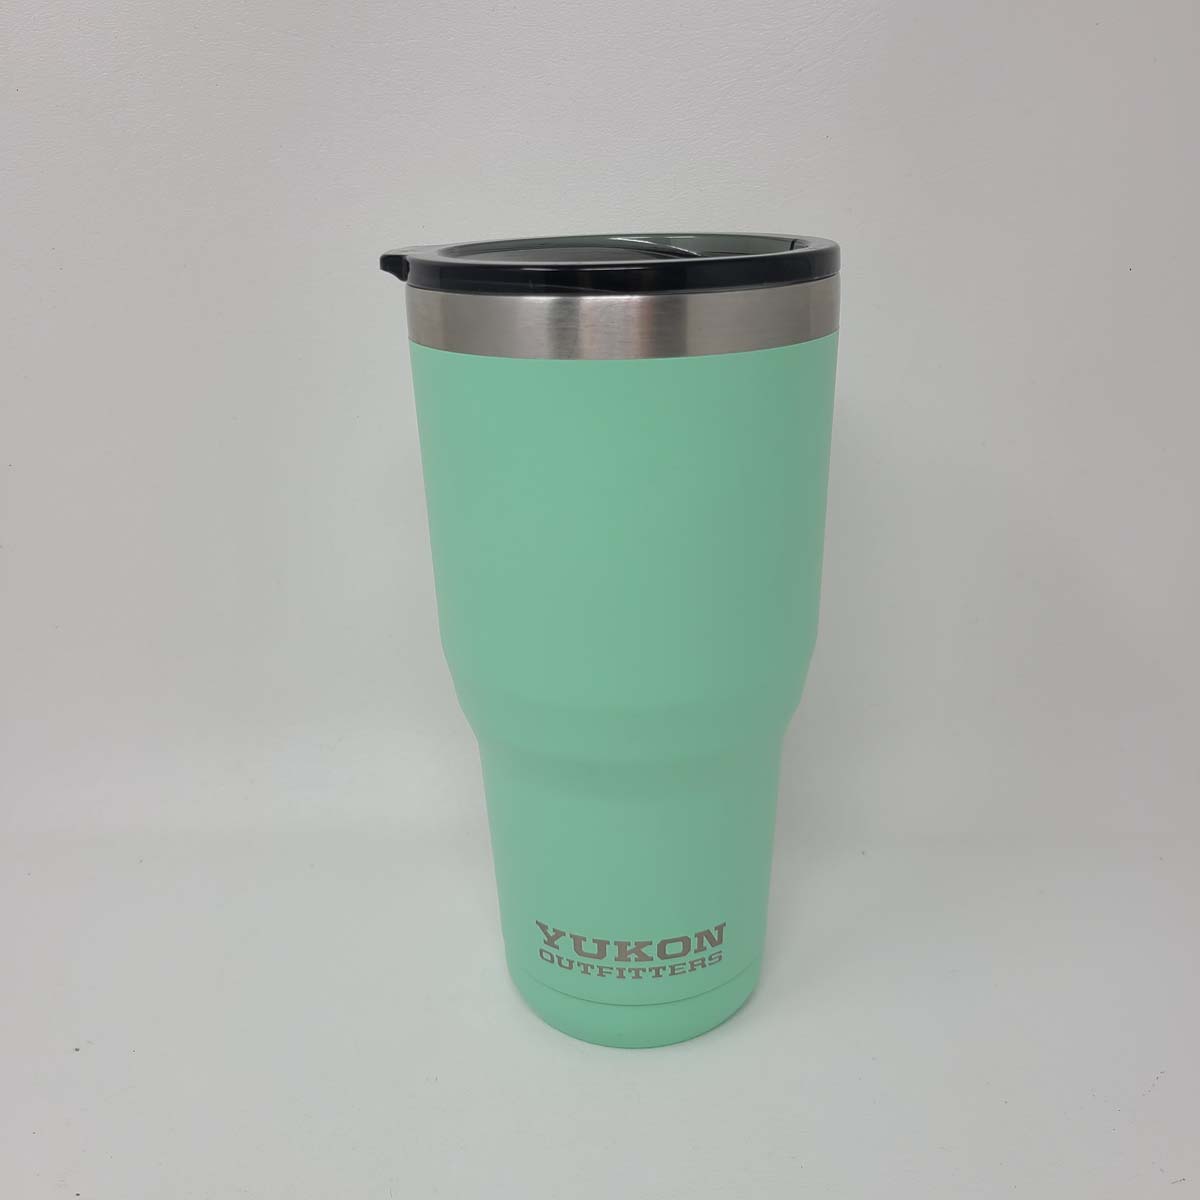 Yukon Outfitters Tumbler Handle